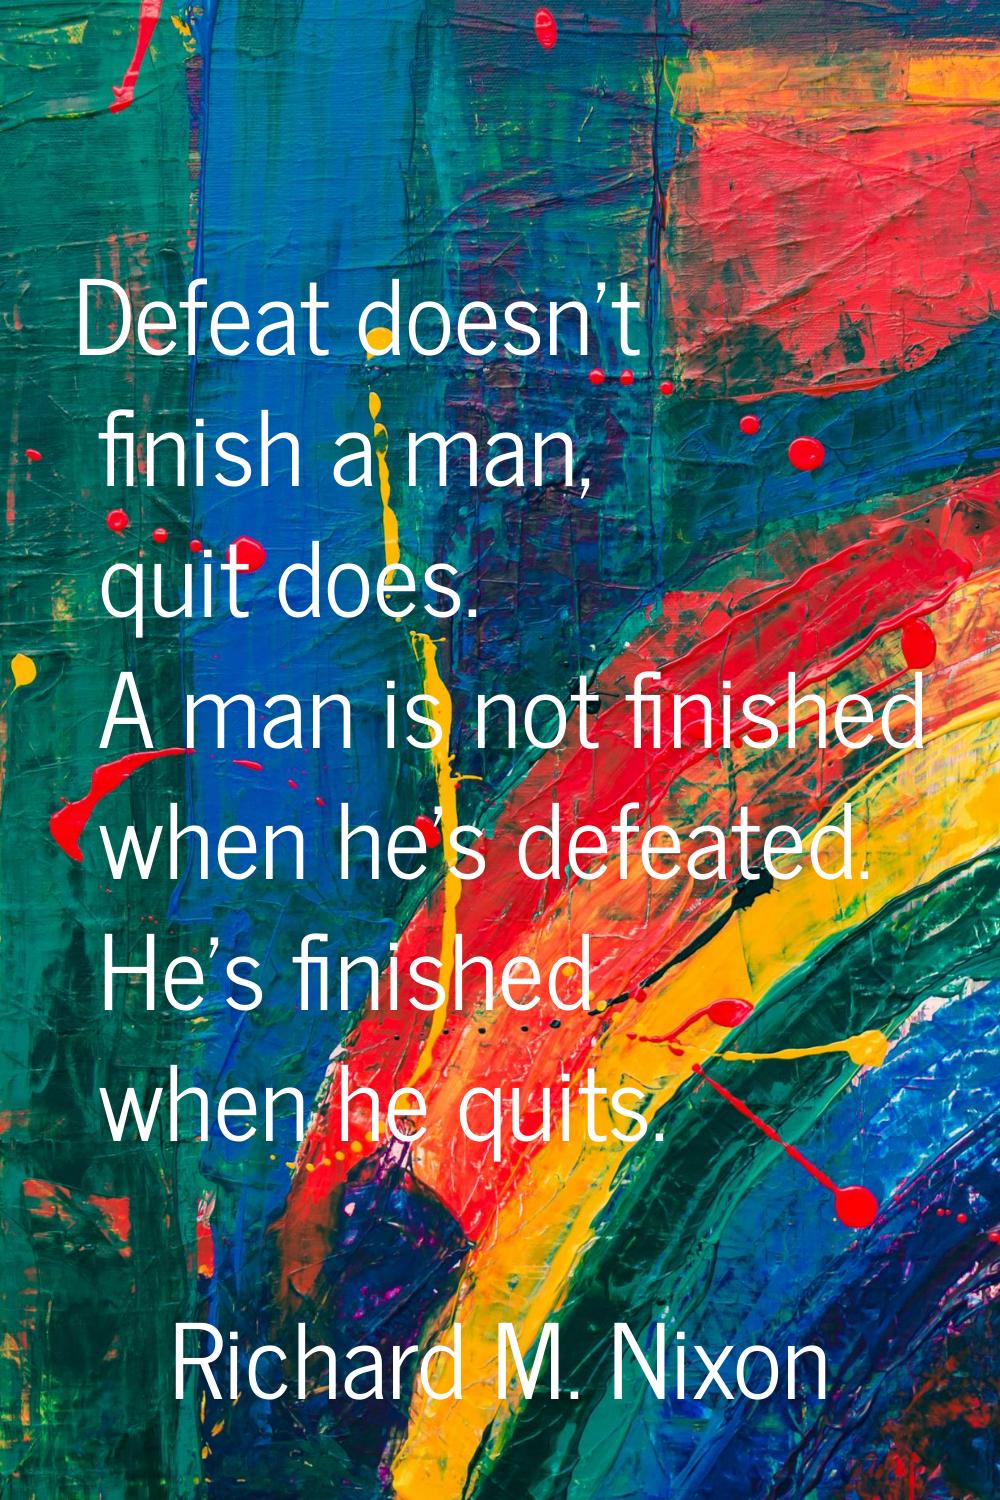 Defeat doesn't finish a man, quit does. A man is not finished when he's defeated. He's finished whe